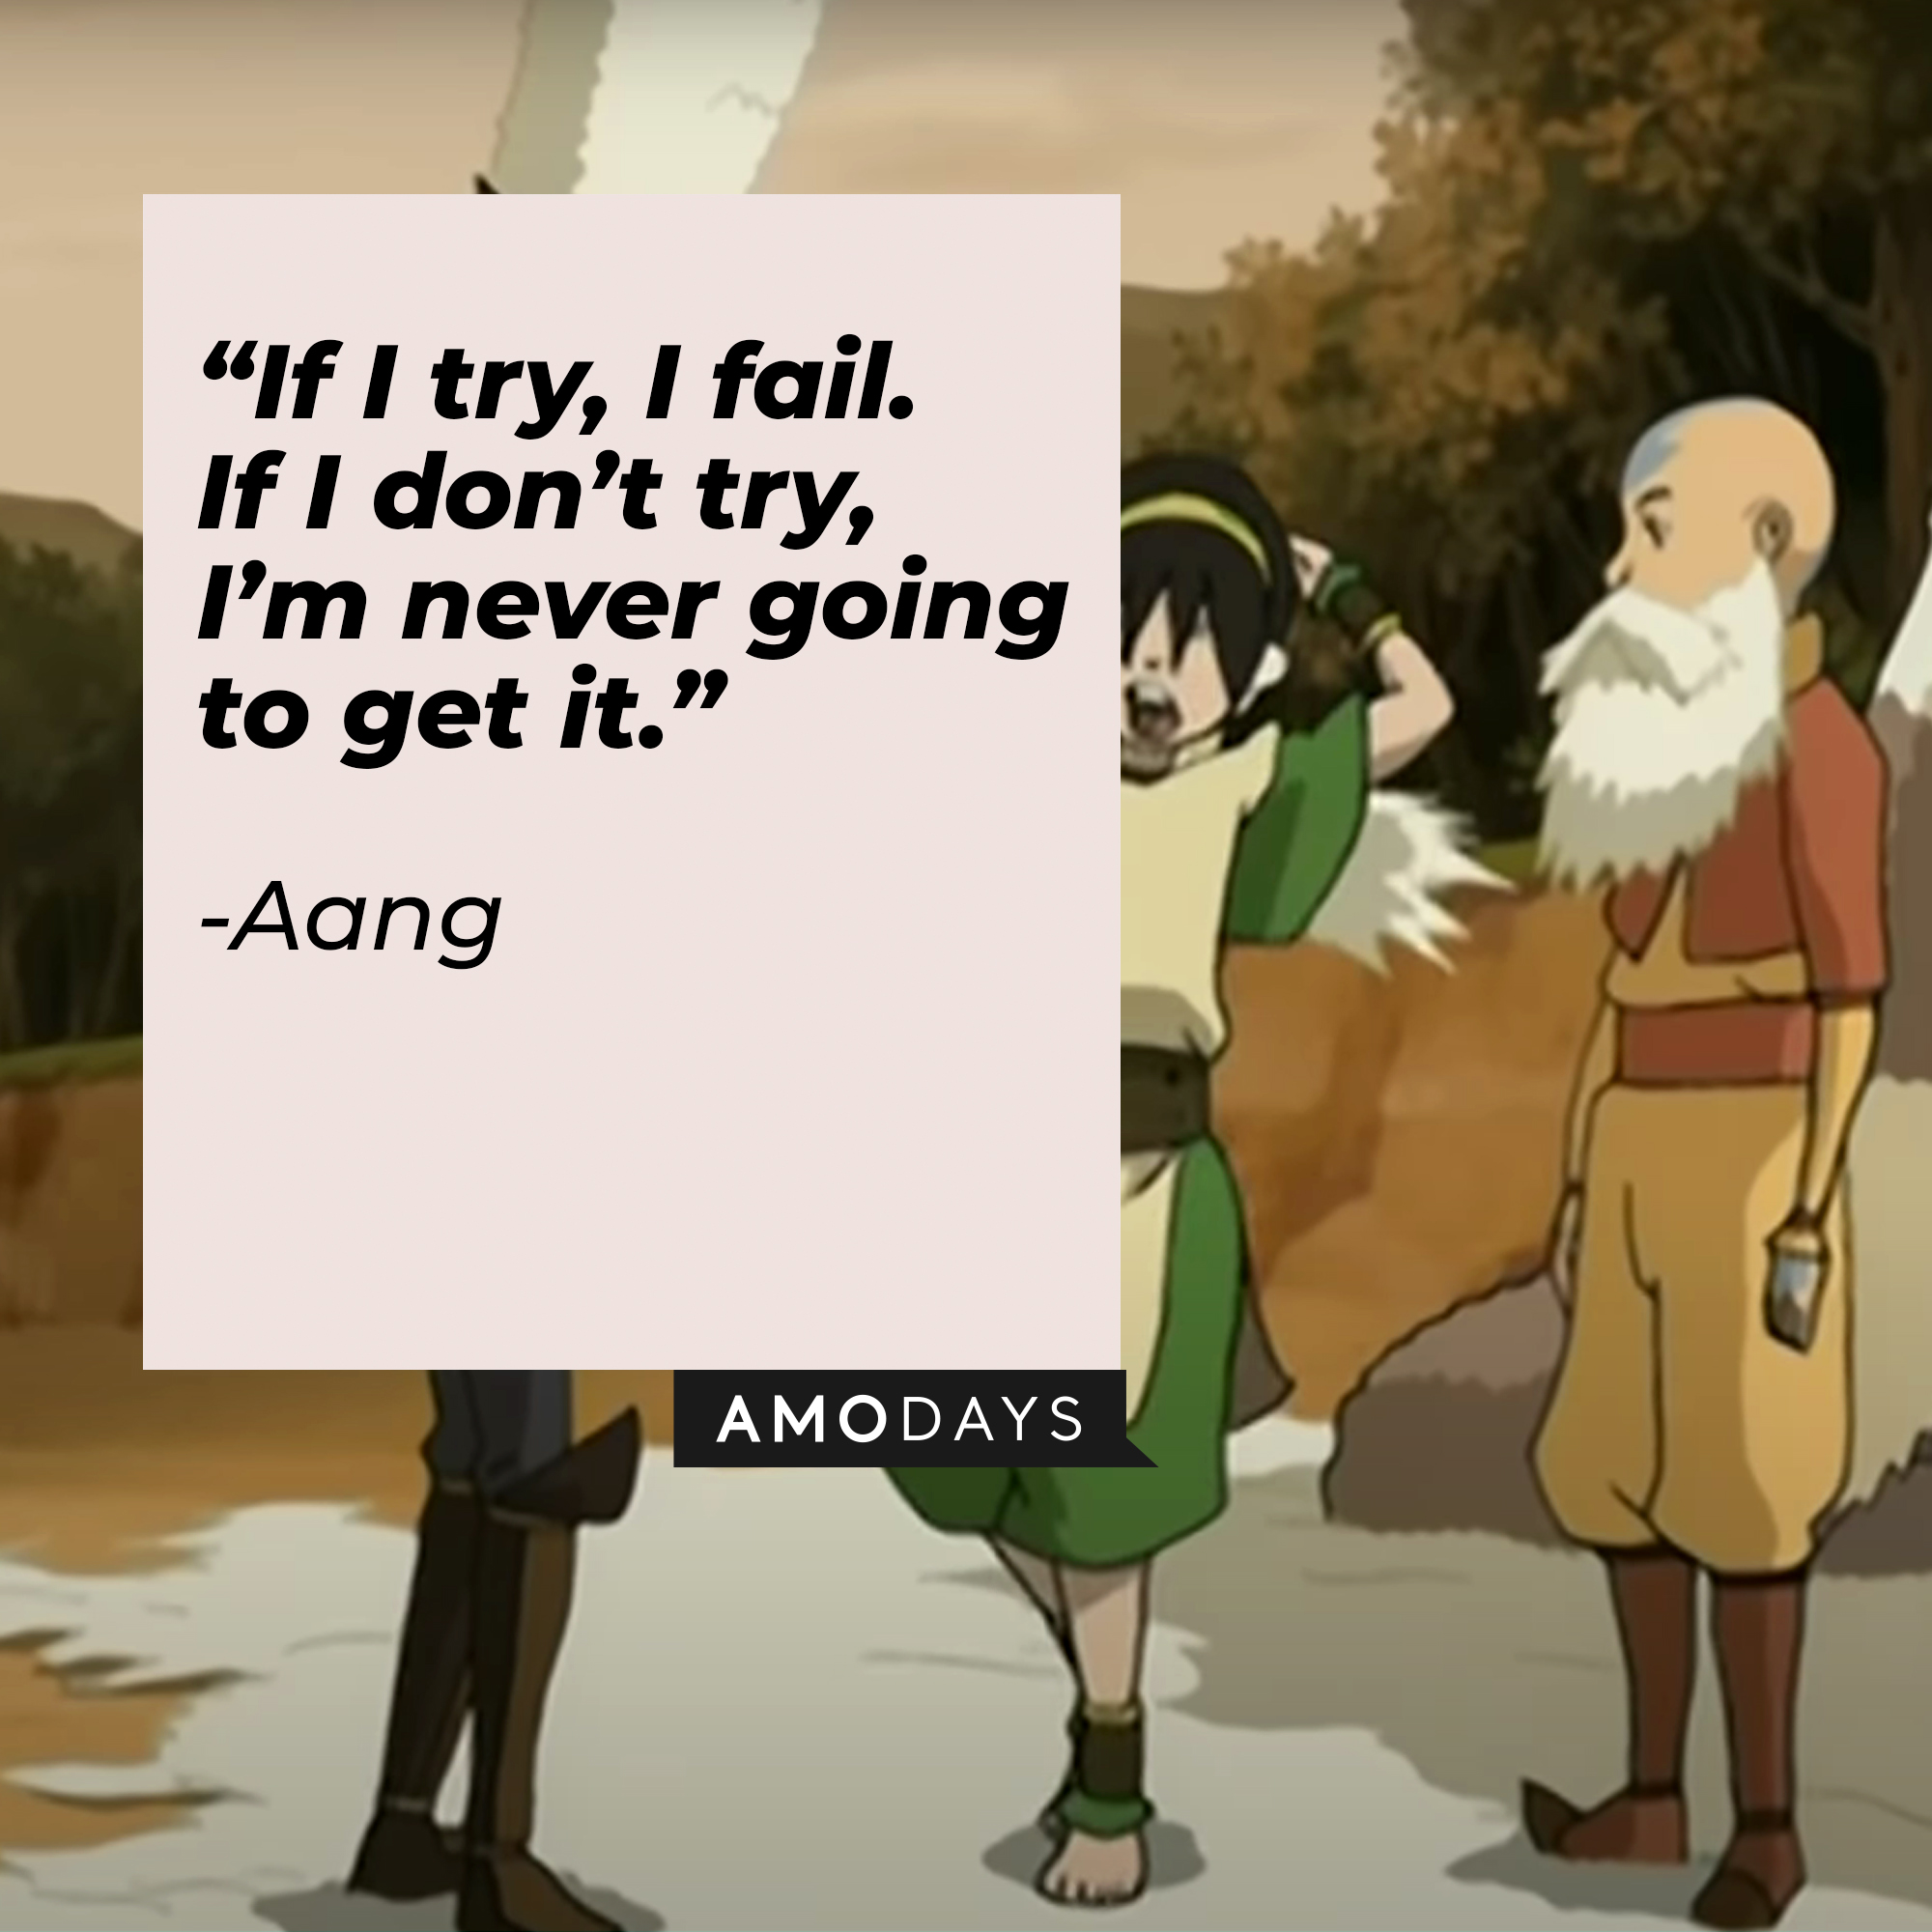 Aang’s quote: “If I try, I fail. If I don’t try, I’m never going to get it.” | Source: Youtube.com/TeamAvatar